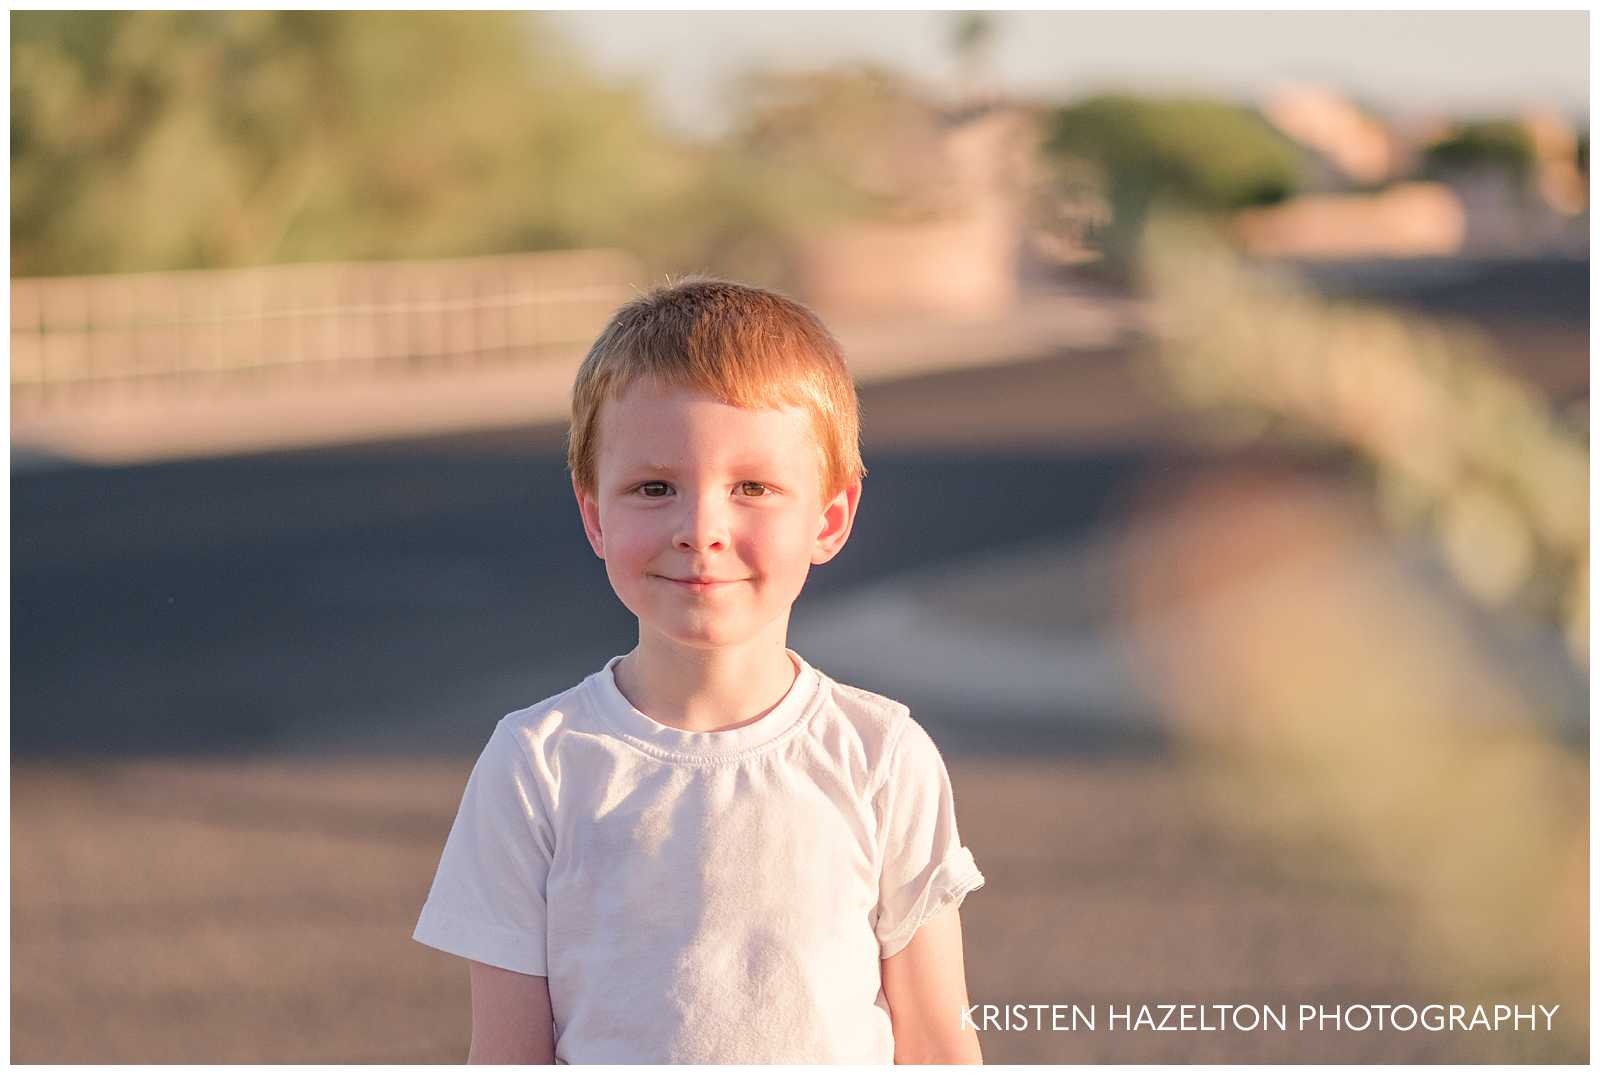 Young boy in Tucson, AZ at sunset